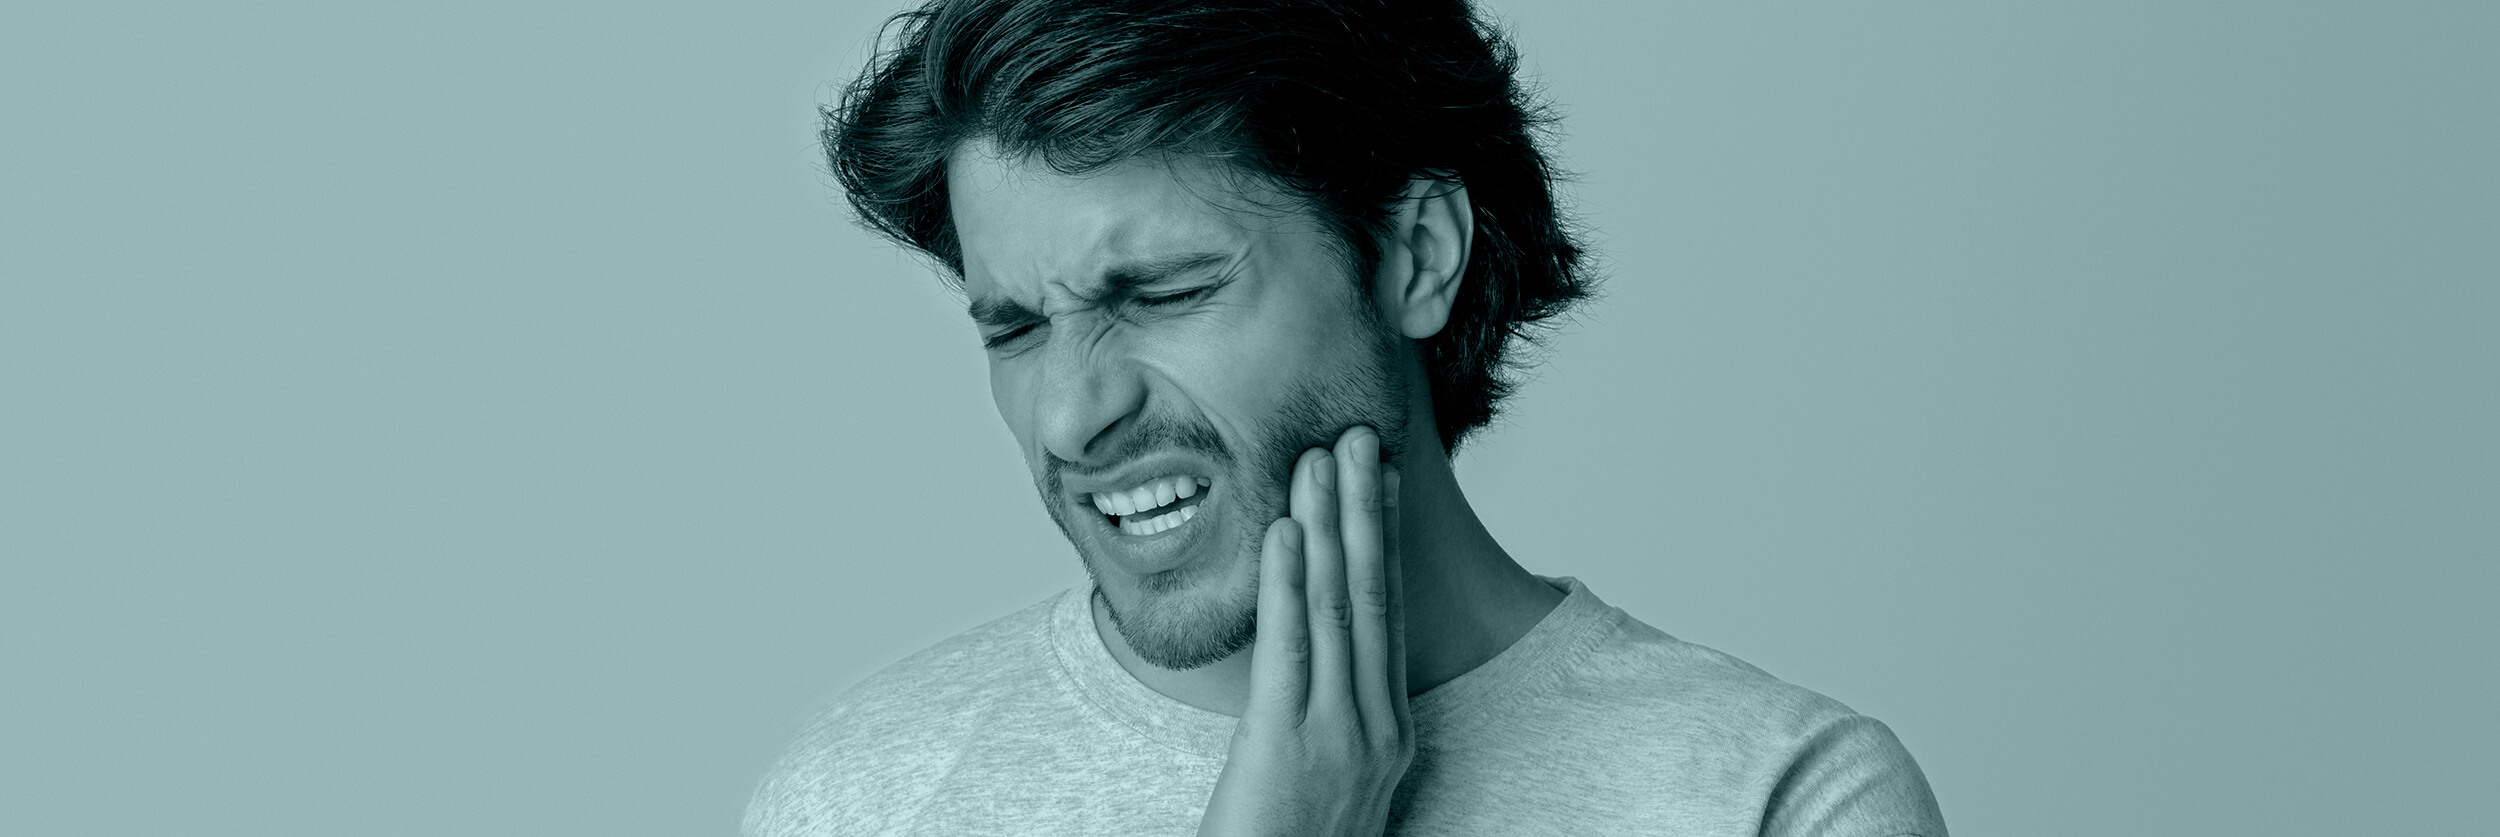 man having a toothache holding his cheek